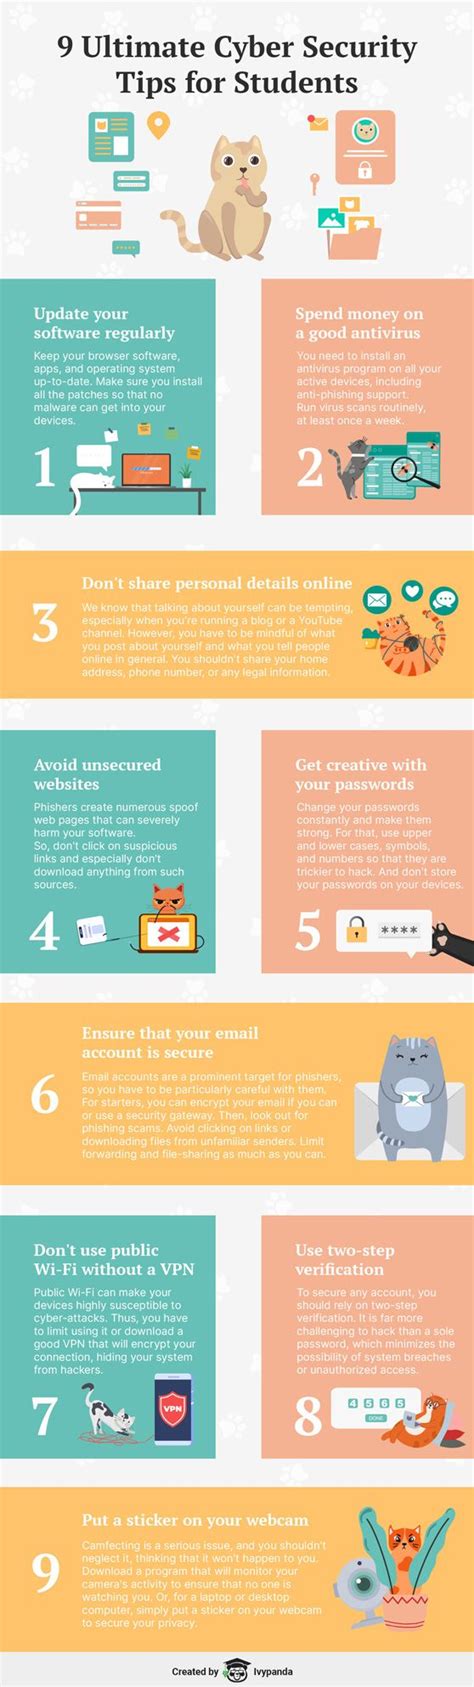 9 Cyber Security Tips For Students Infographic Security Tips Cyber